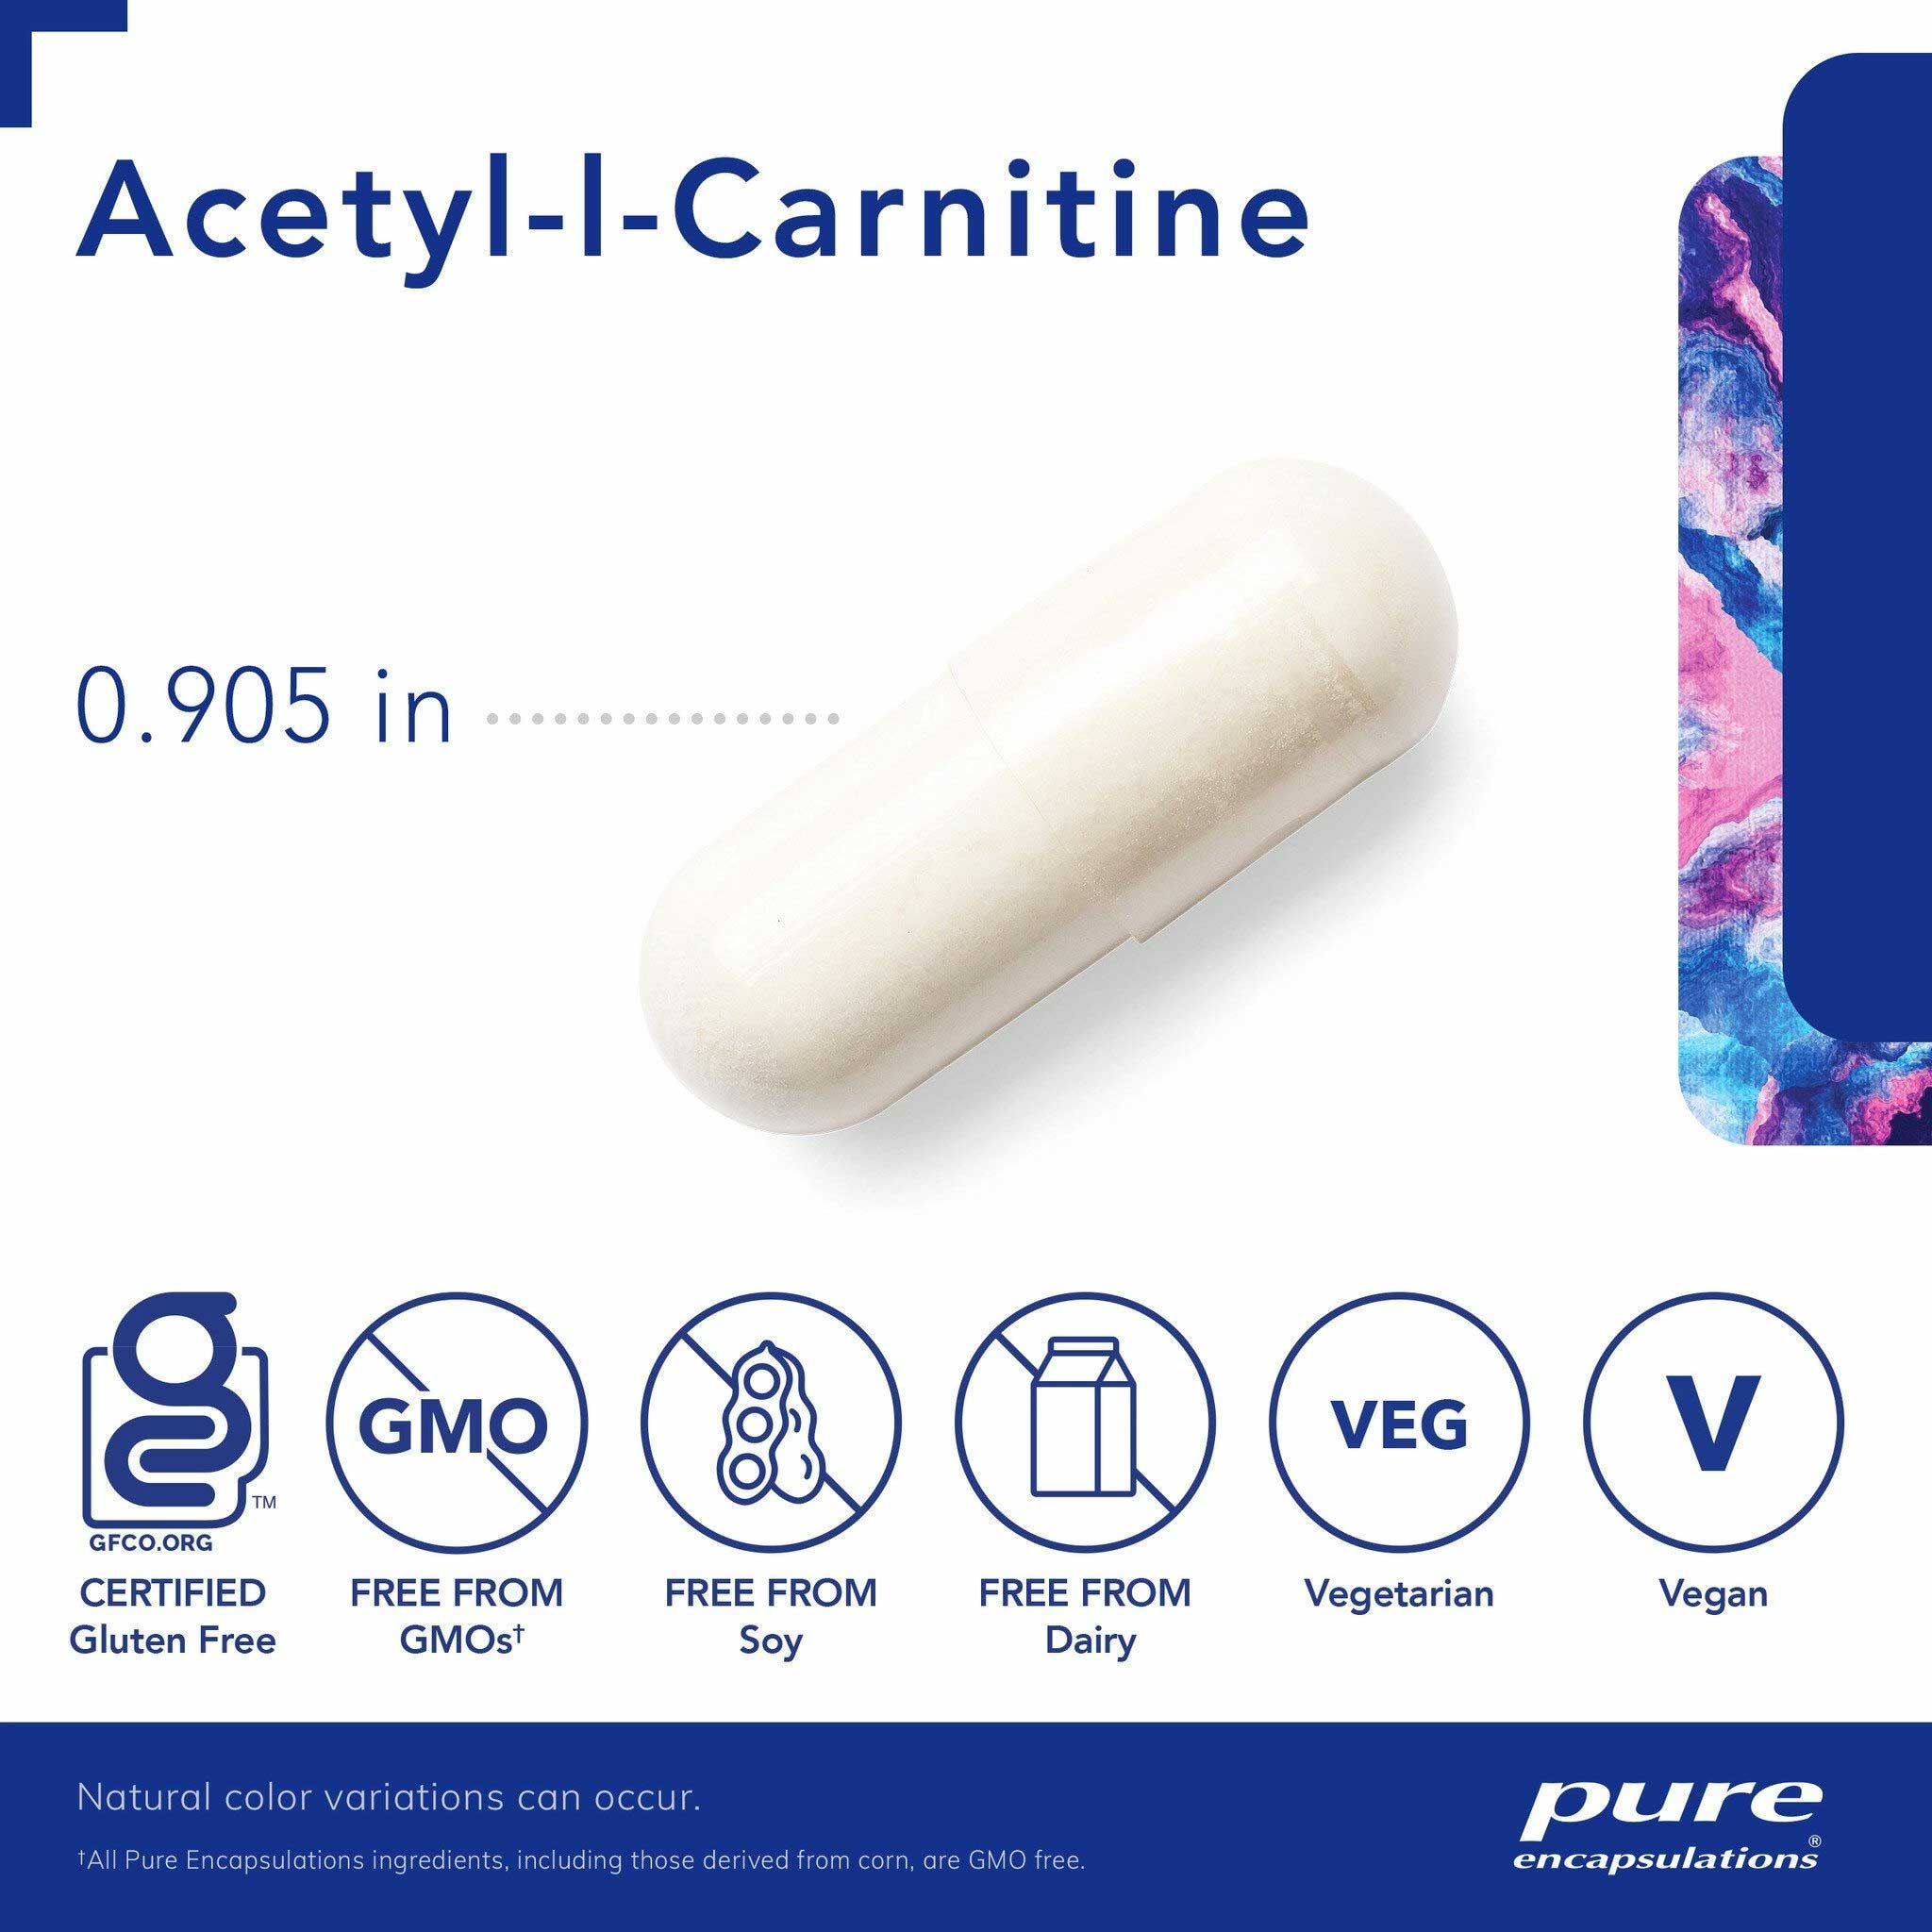 Pure Encapsulations Acetyl-l-Carnitine 500mg Capsules